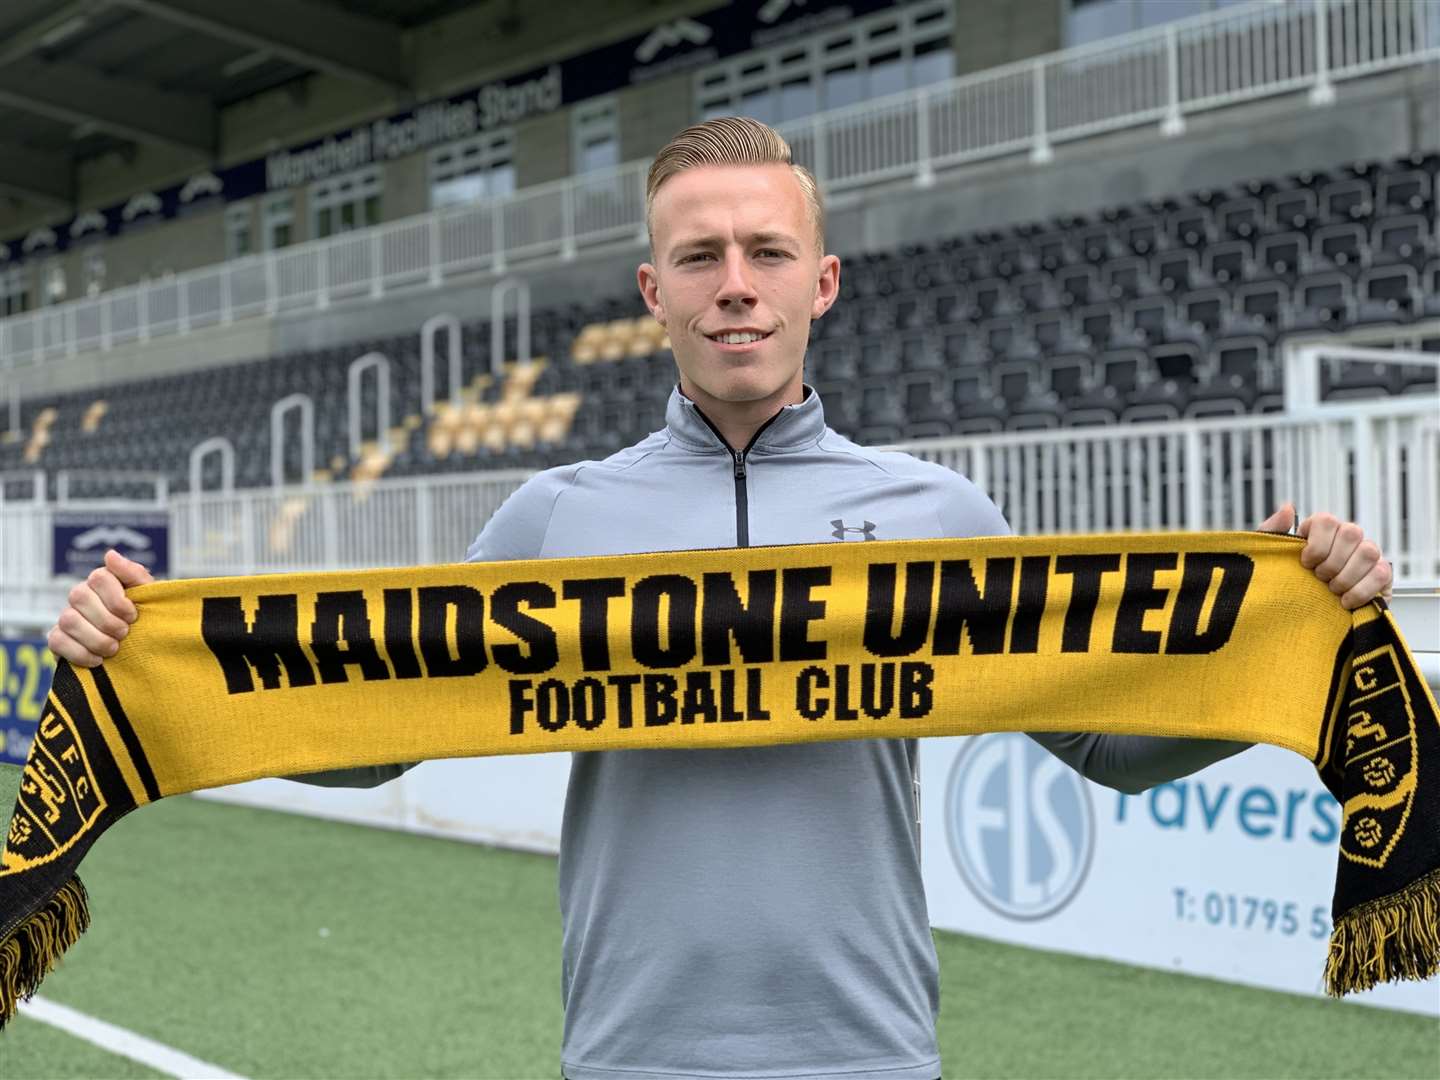 Sam Corne signed for Maidstone United this week